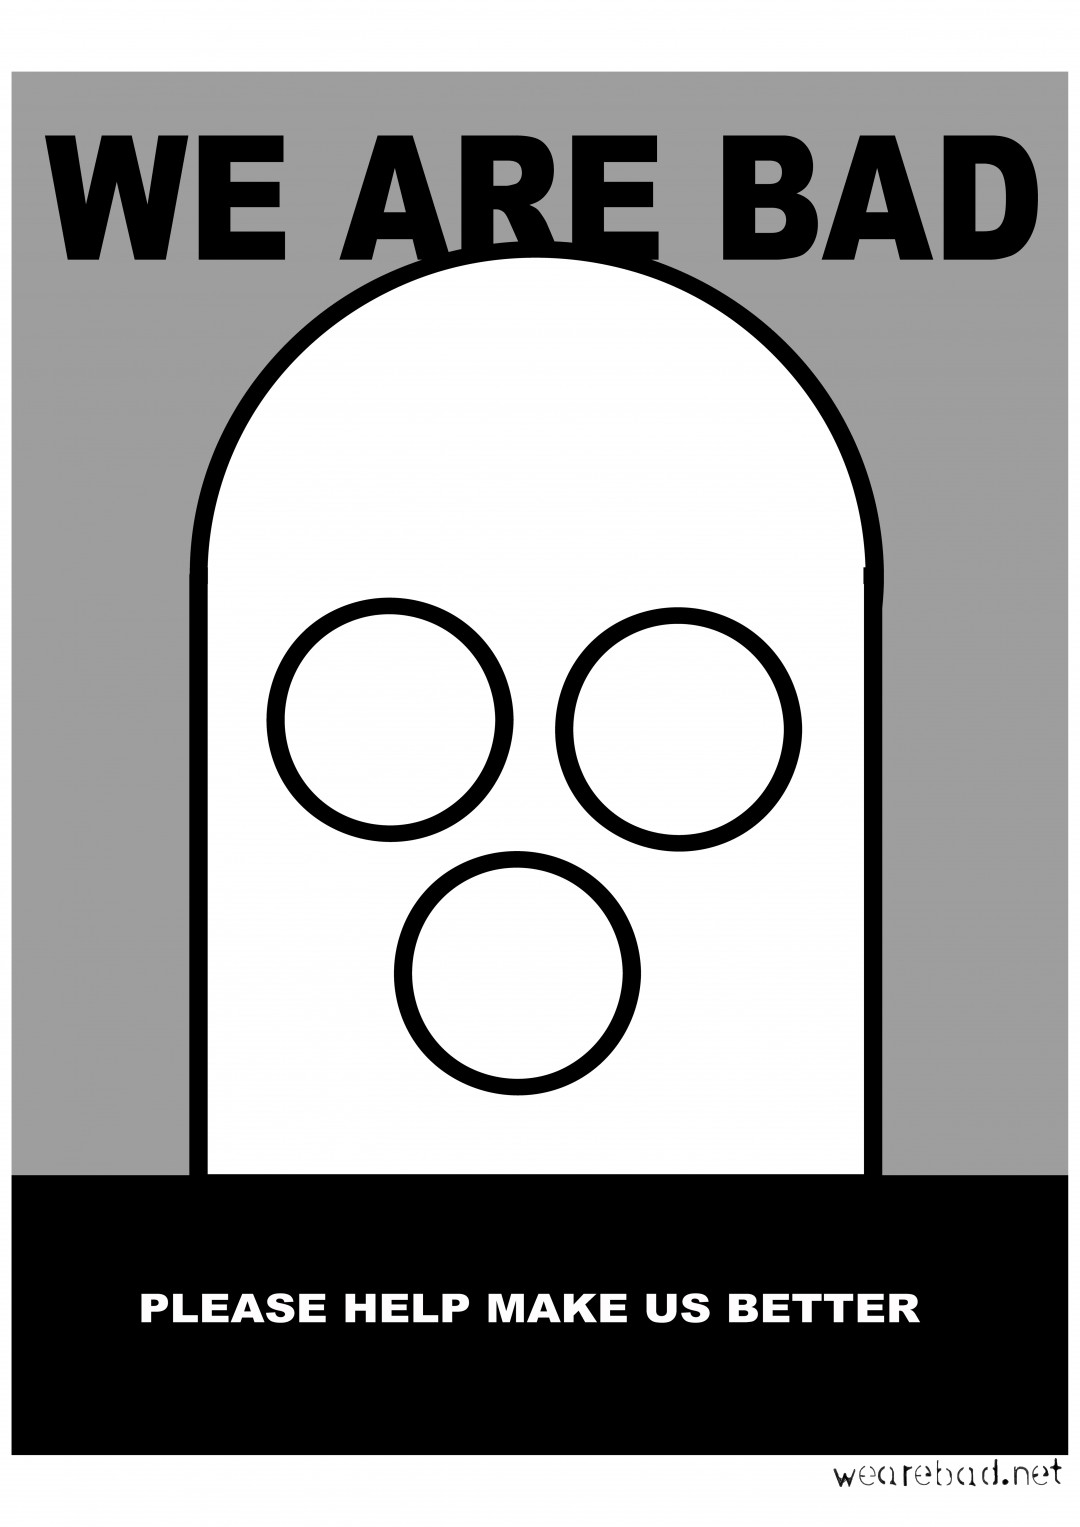 WE ARE BAD poster by Robin Bale